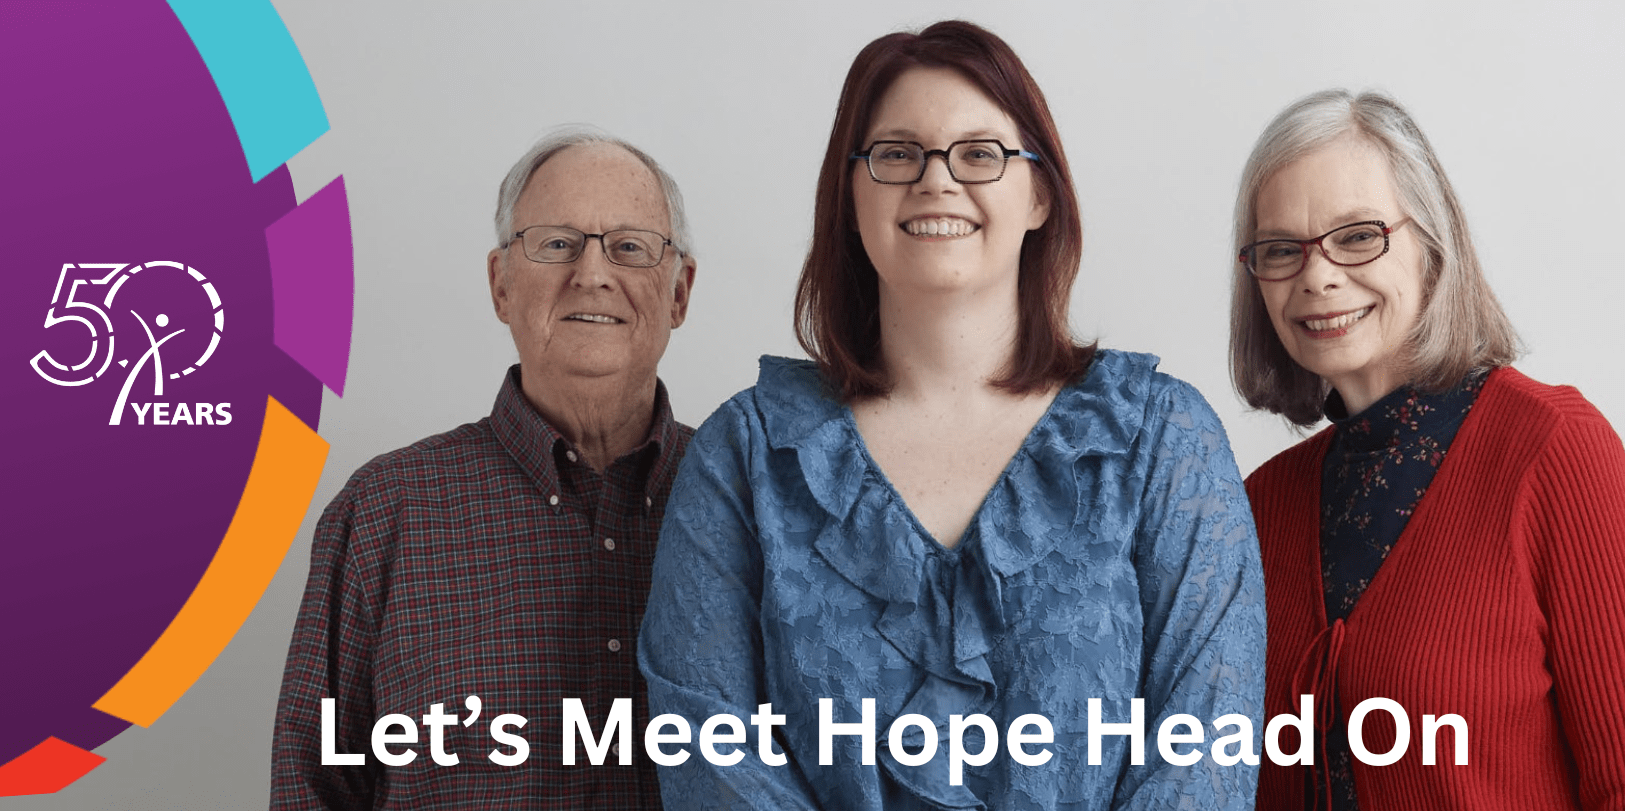 Long-term GBM survivor Katie Groetsema and her parents with the text, "Let's Meet Hope Head On."